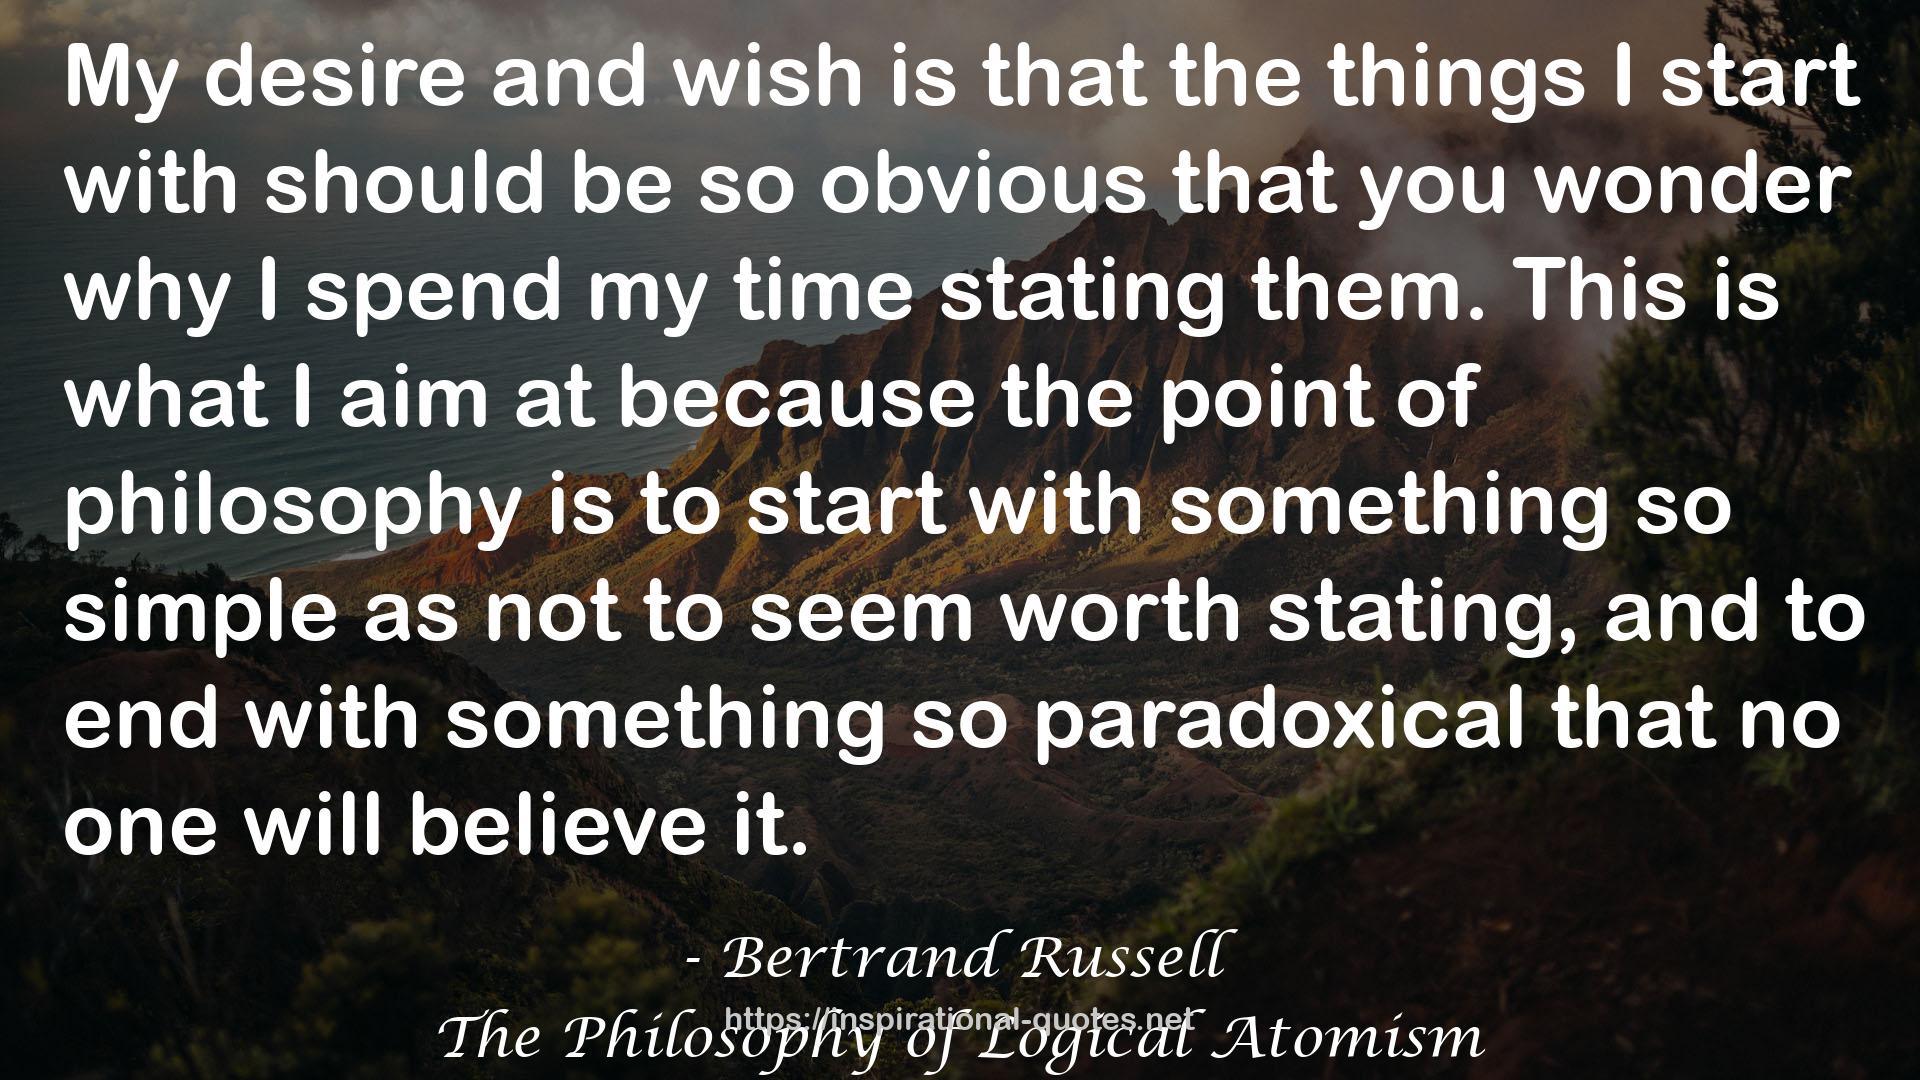 Bertrand Russell QUOTES